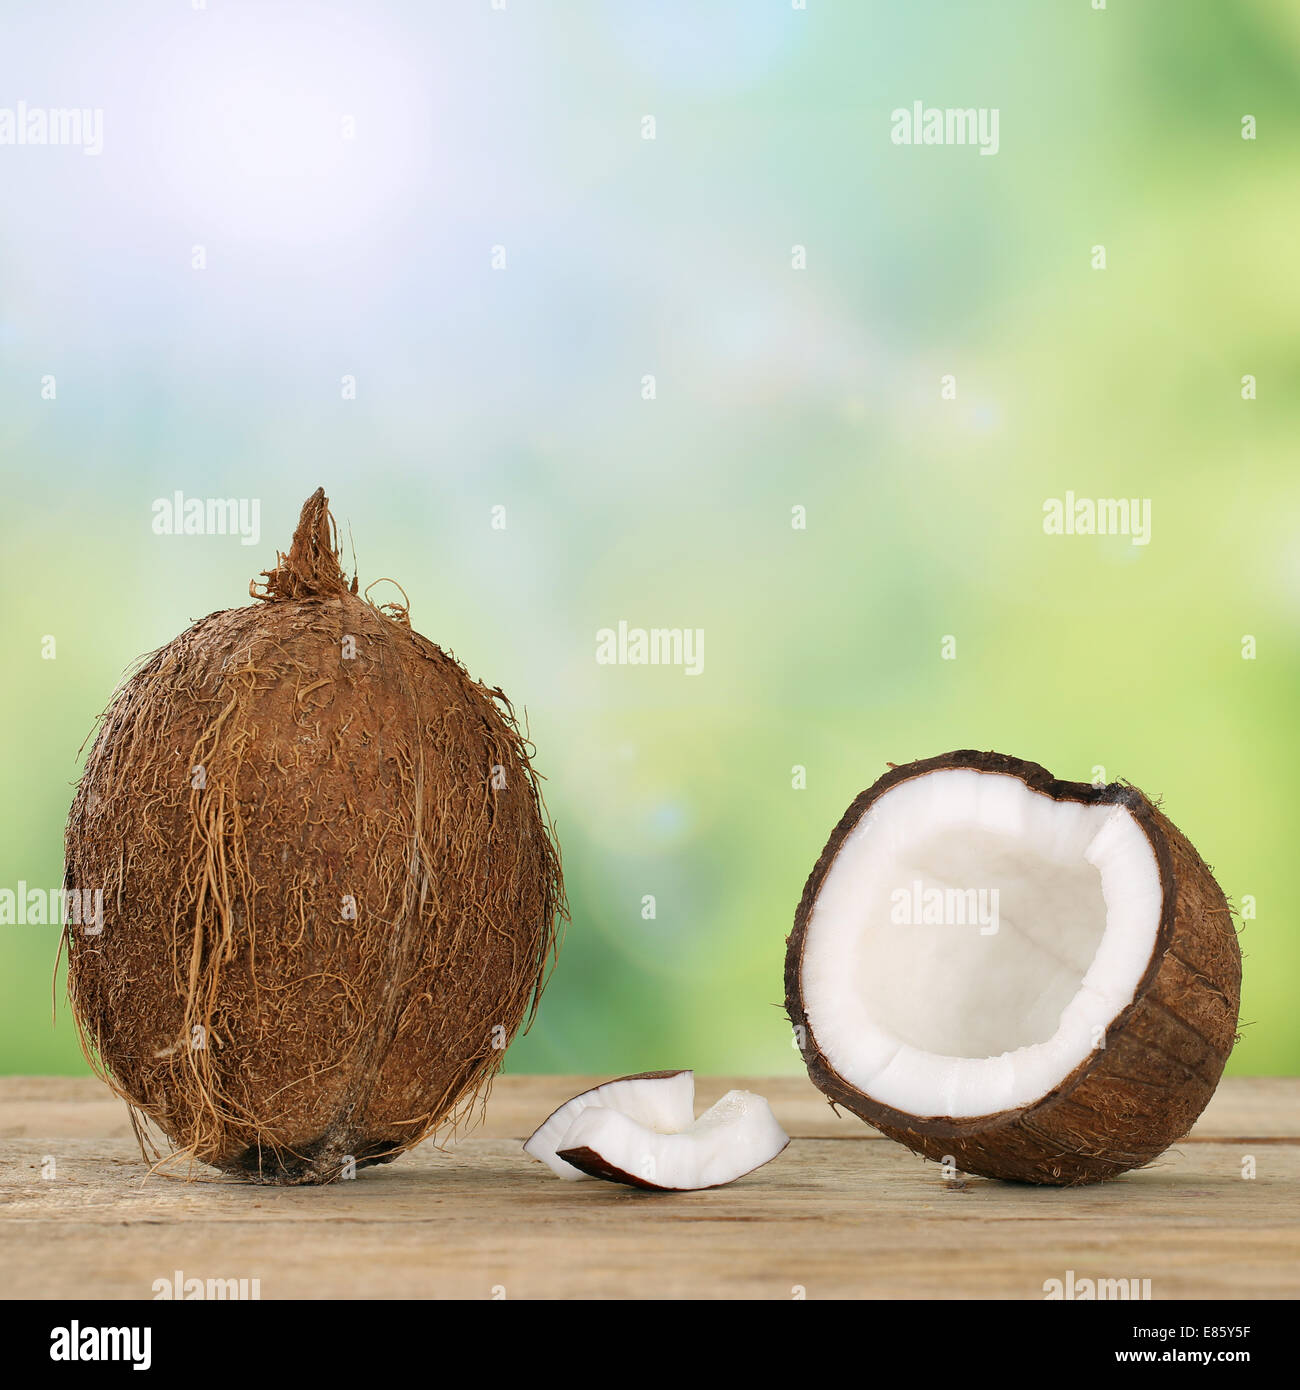 Tropical coconut fruits in summer with copyspace Stock Photo